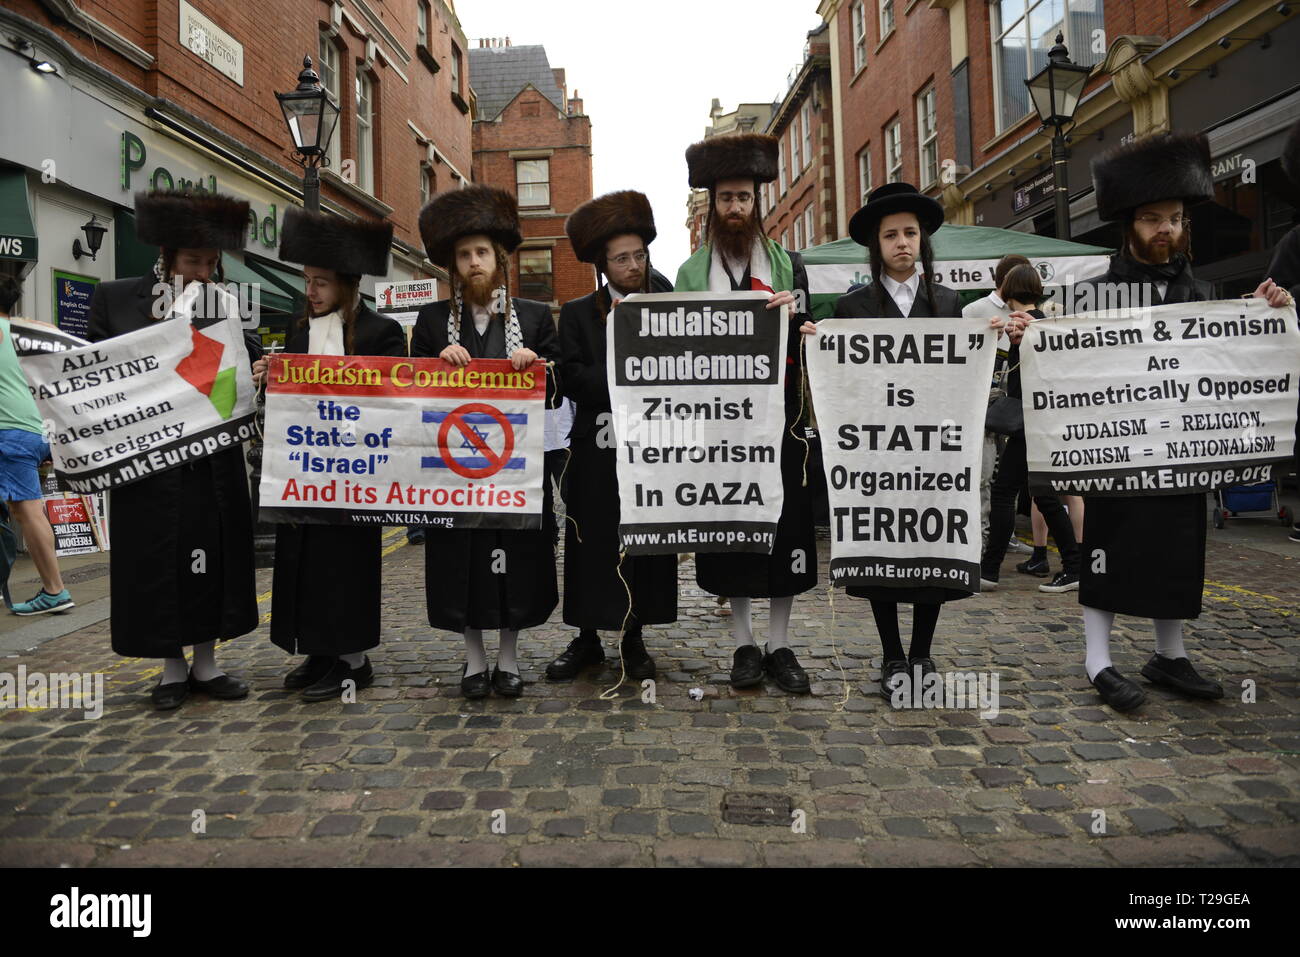 Orthodox Jews are seen holding placards during the Exist, Resist, Return Rally for Palestine in London. People gather outside the Israeli embassy in London to demonstrate against the Israeli government, and to demand respect for Palestinians’ fundamental rights to exist, resist and return. Palestinians are calling for global protests to support their right to come back to their villages. Rally was organized by Palestine Solidarity Campaign, Stop the War Coalition, Palestinian Forum in Britain, Friends of Al- Aqsa, and Muslim Association of Britain. Stock Photo